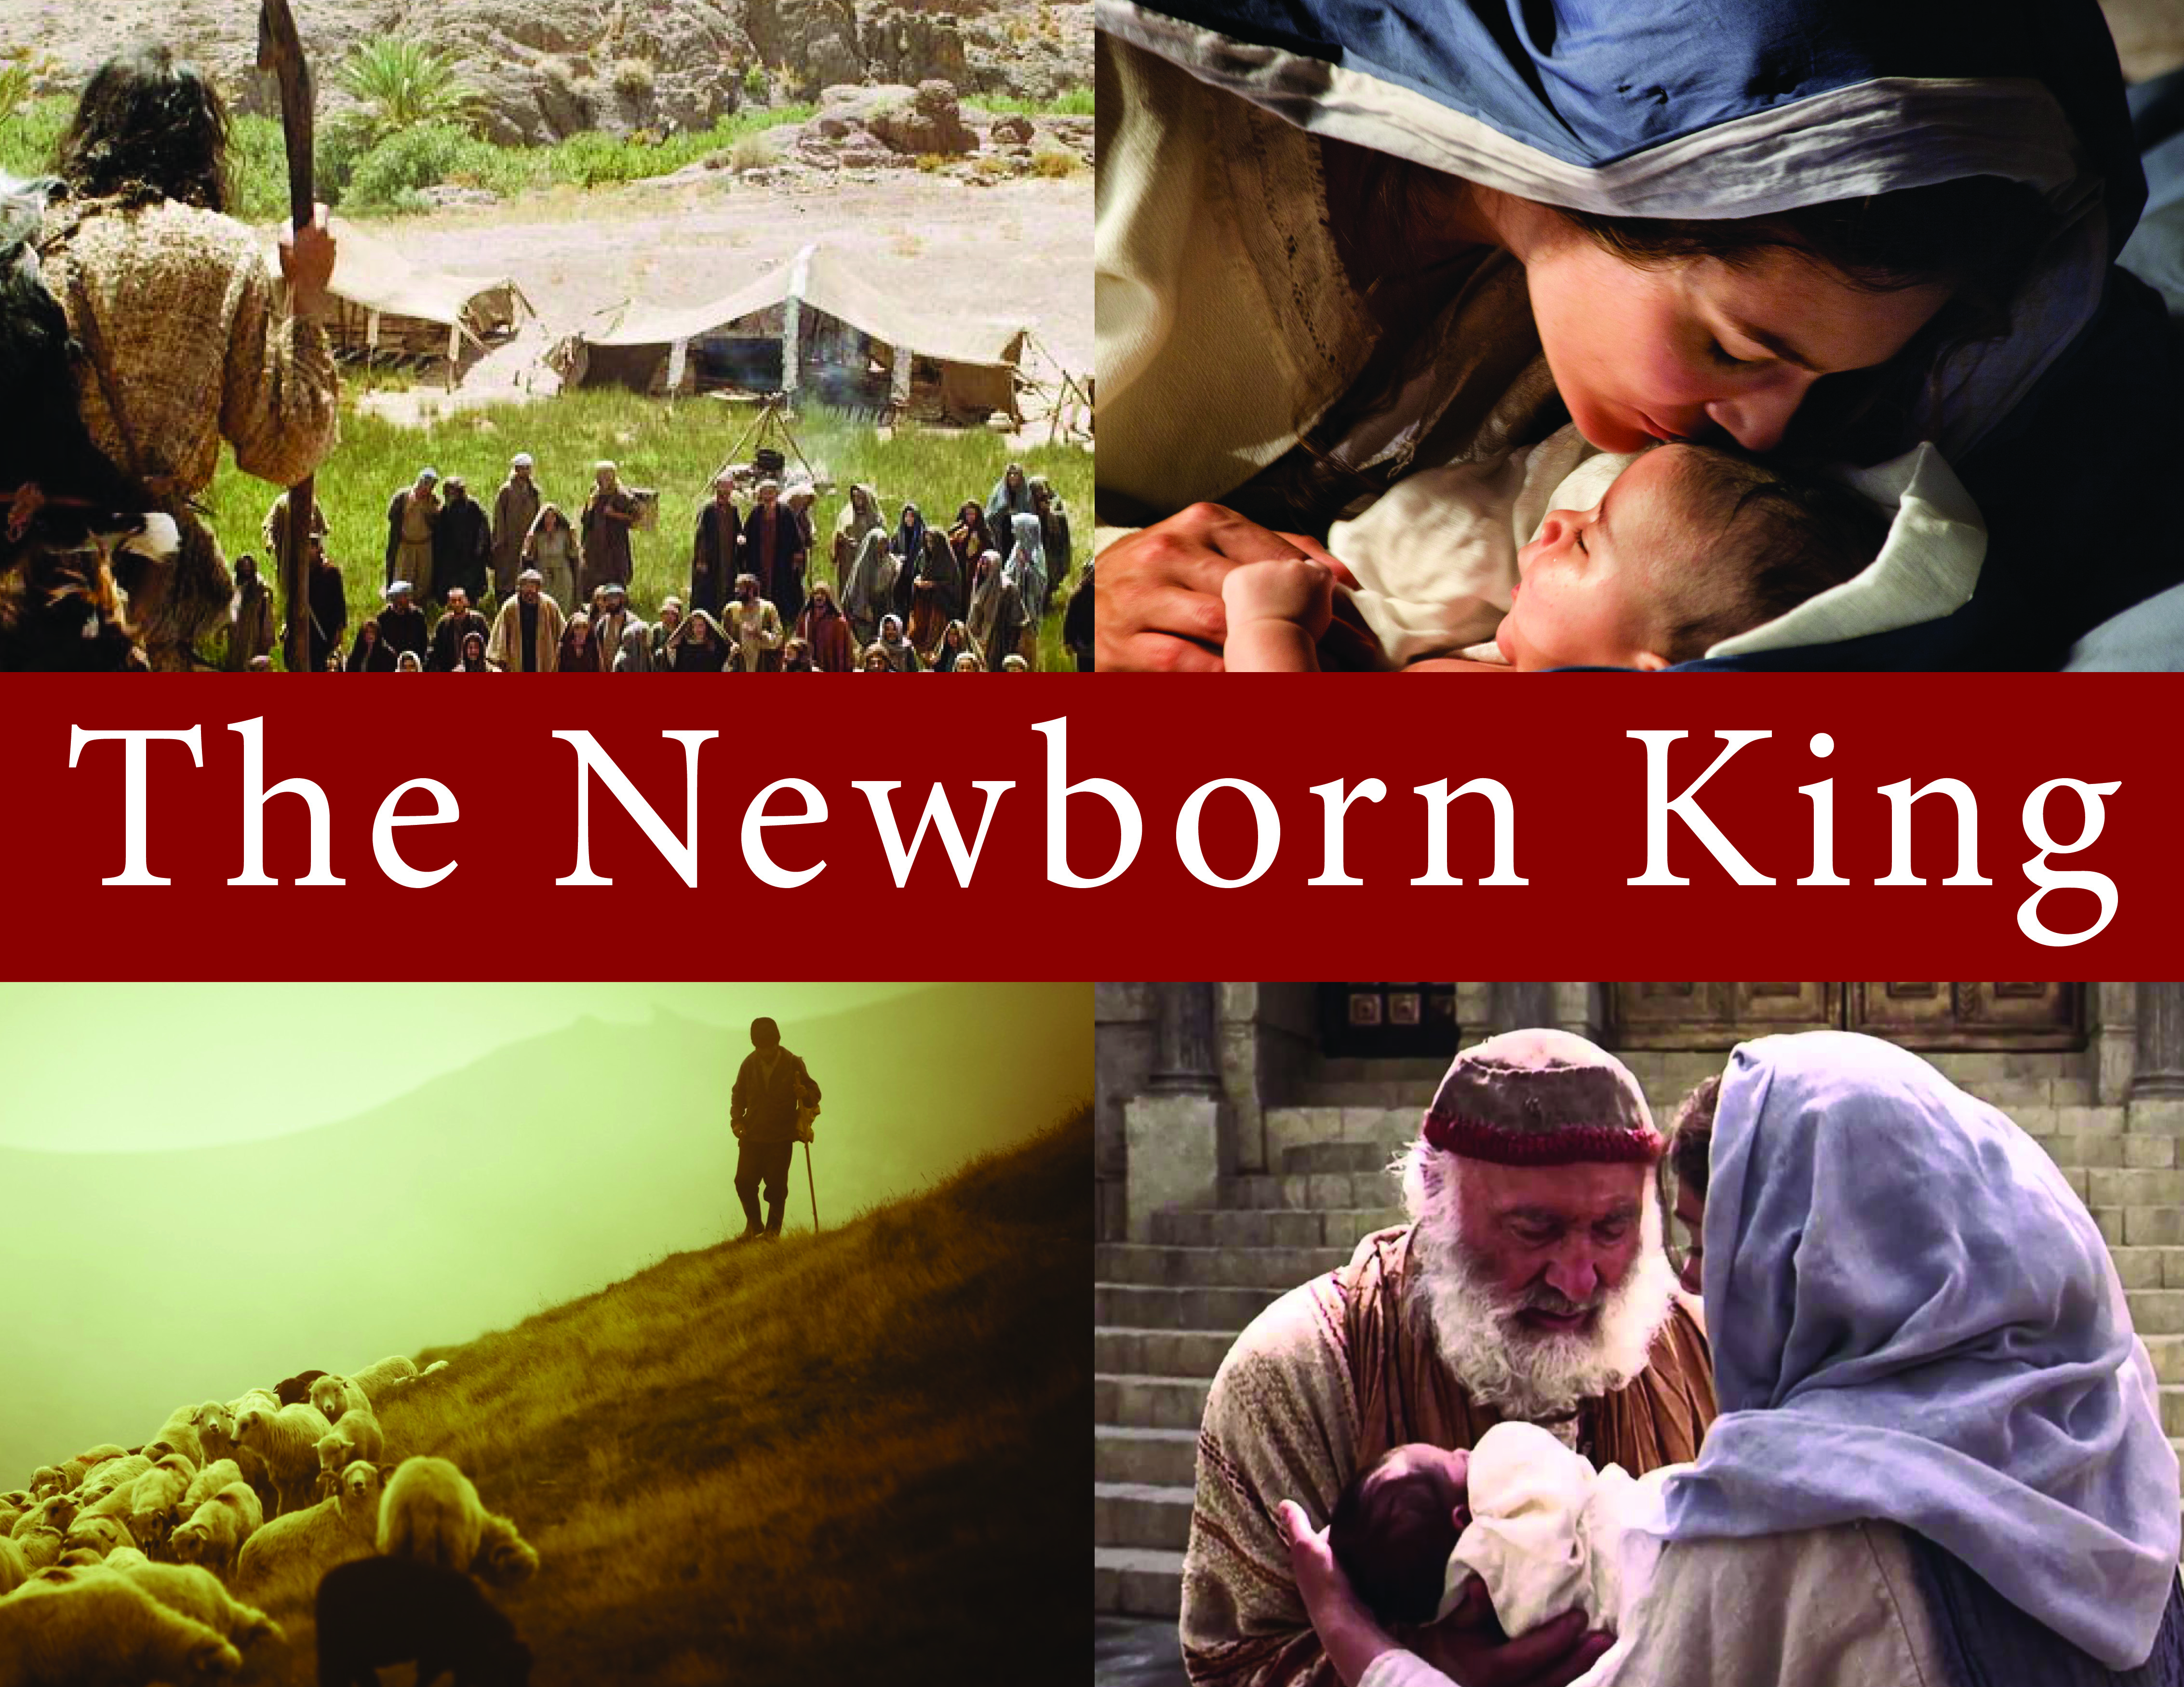 The Newborn King: The Shepherd of our Souls